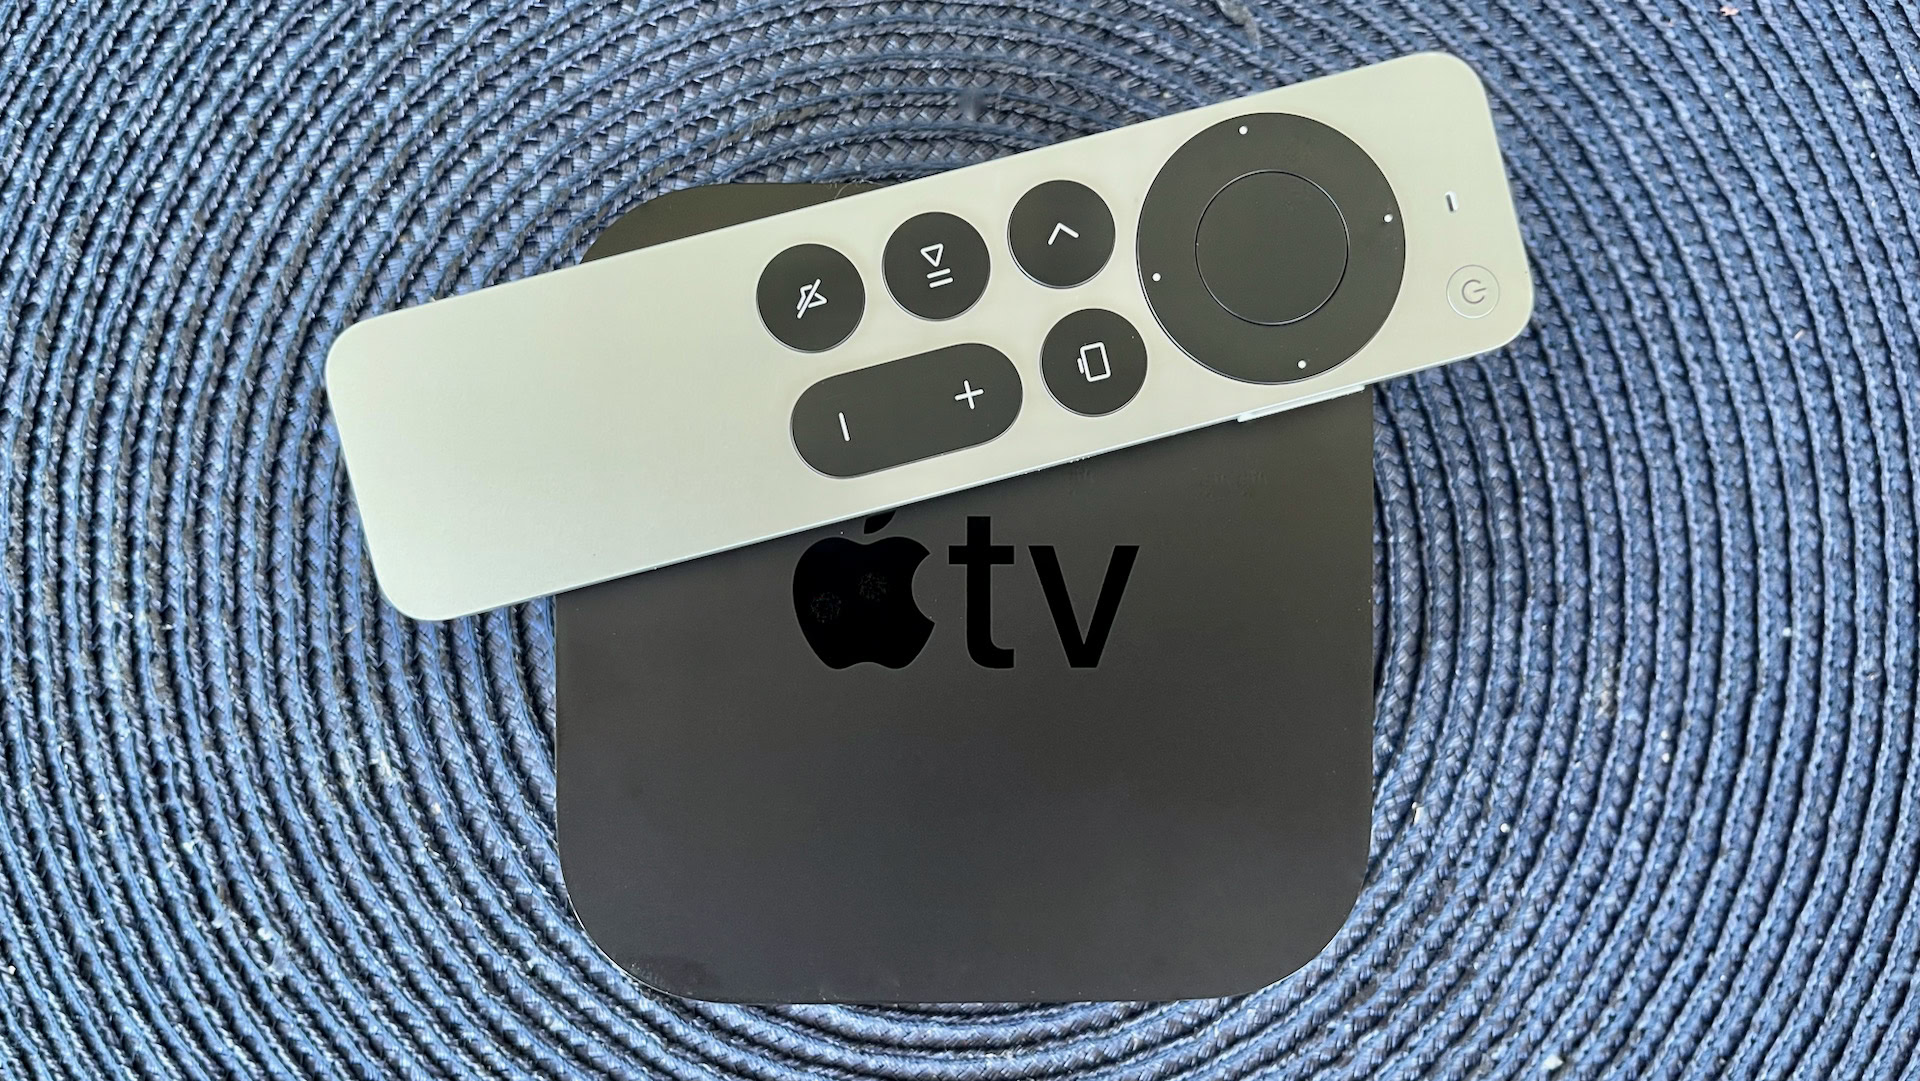 https://www.androidauthority.com/wp-content/uploads/2021/06/Apple-TV-4K-with-remote.jpeg